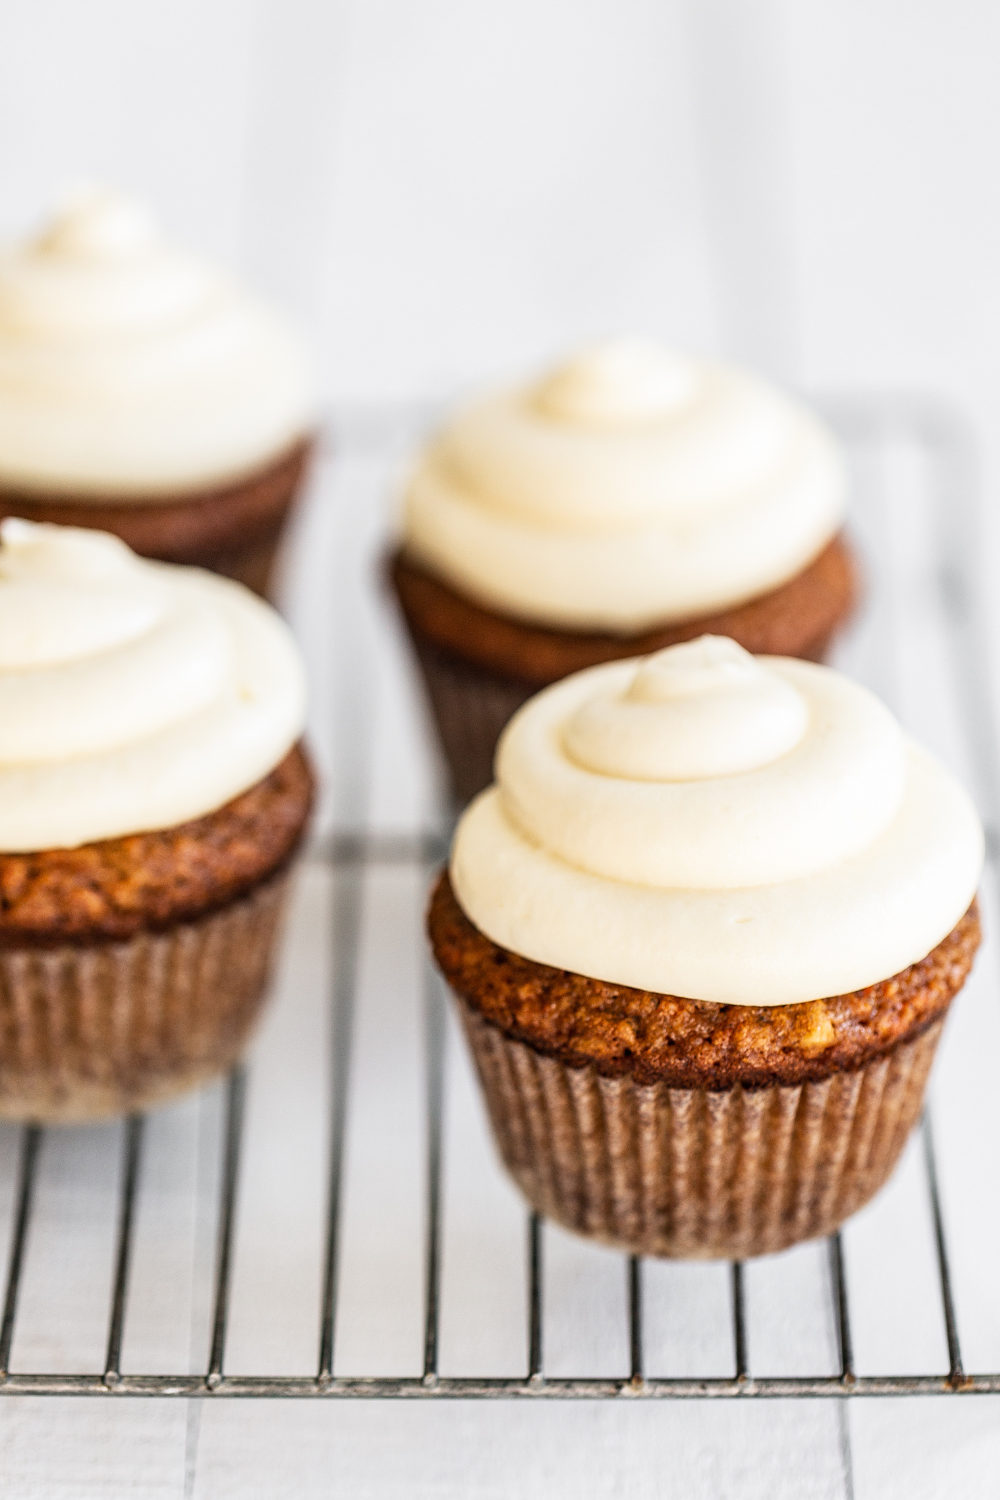 Carrot Cake Cupcakes with cream cheese frosting on a wire rack.